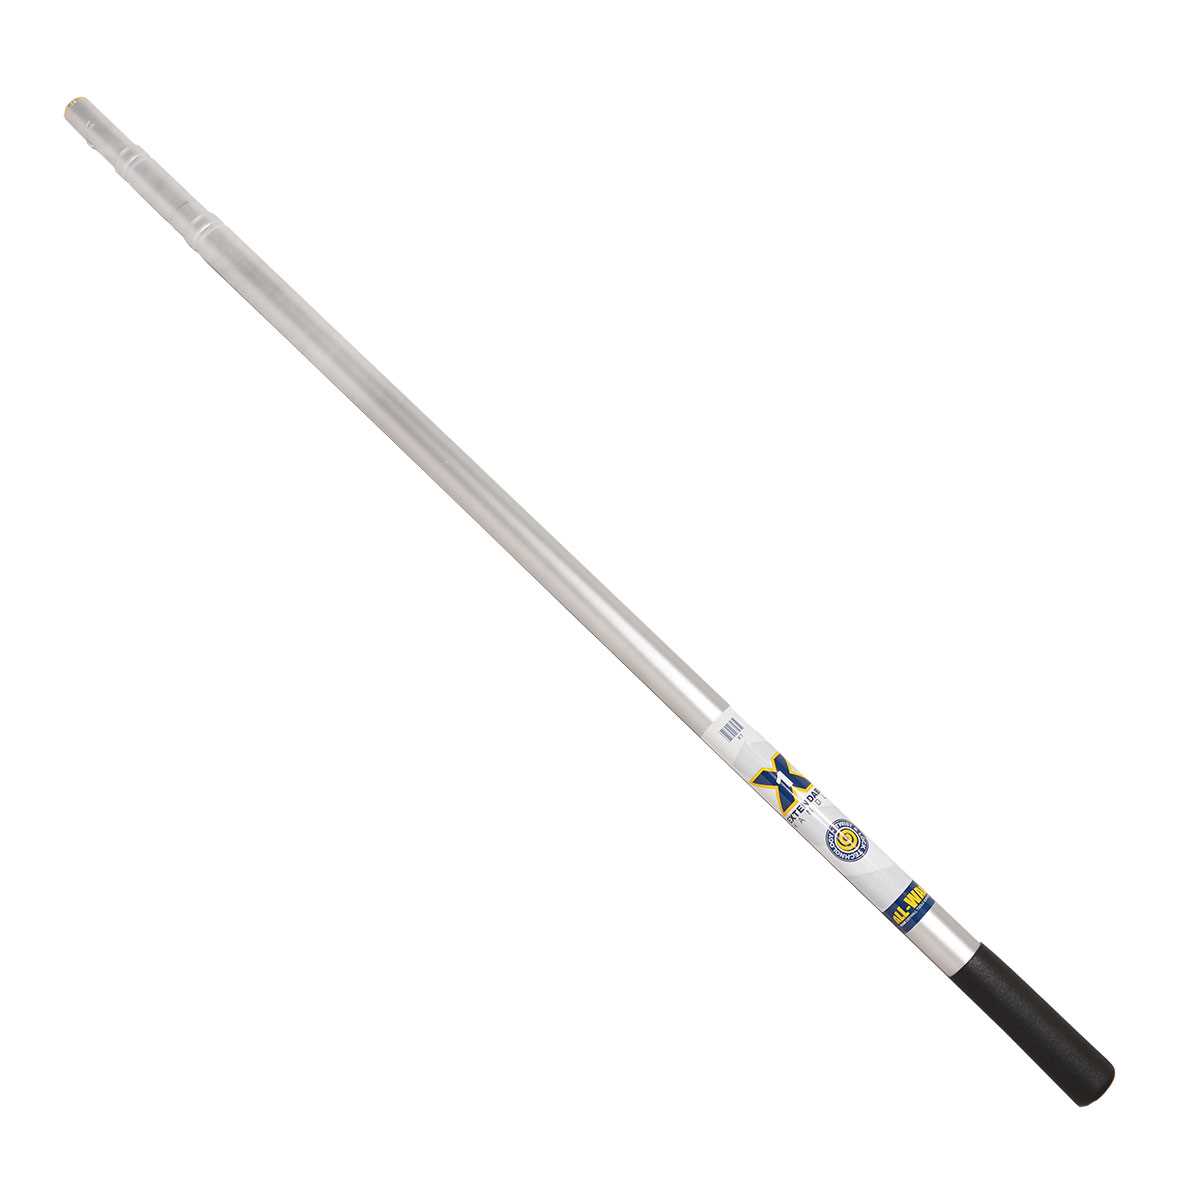 All-Wall X1 Extendable Handle